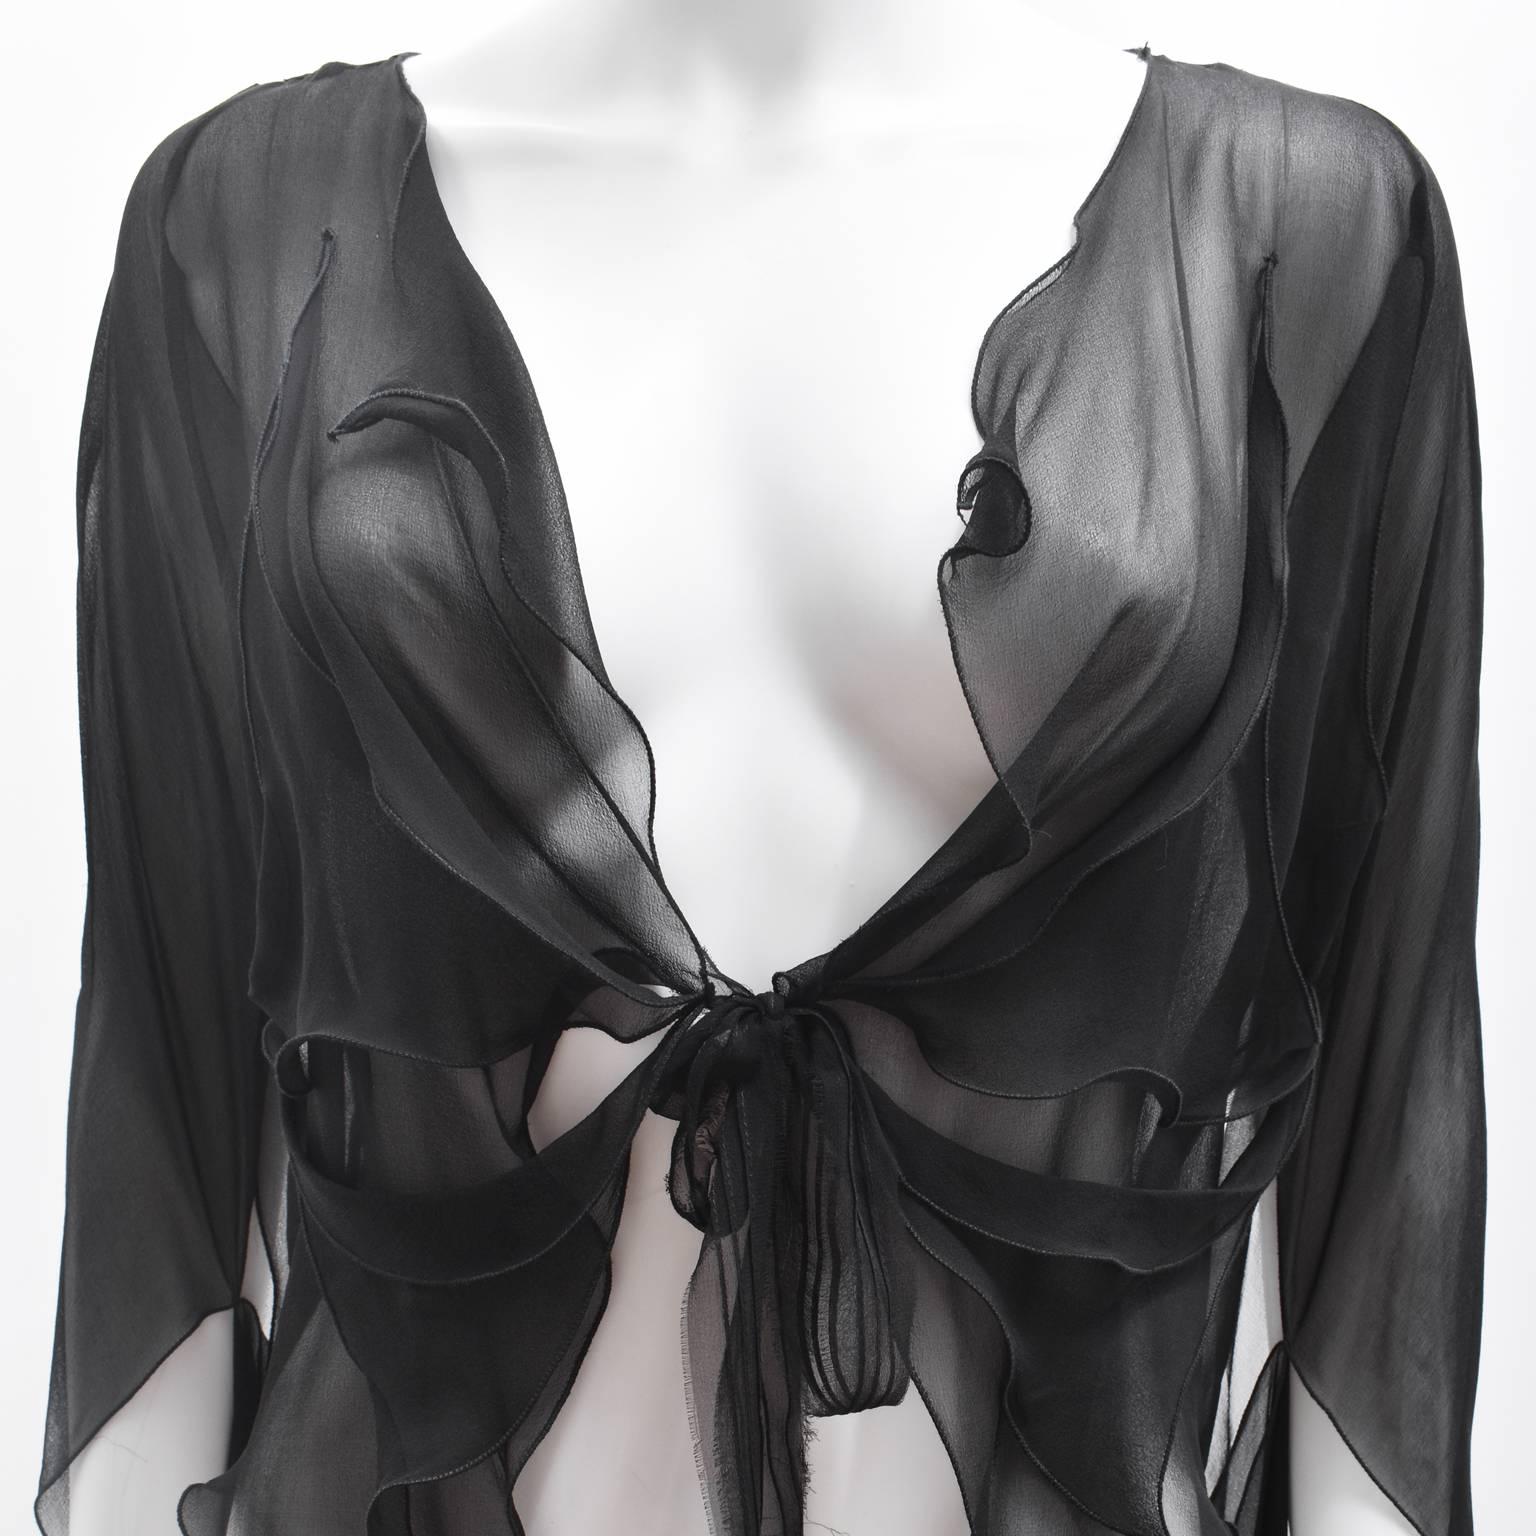 An elegant black sheer silk blouse from British designer Roland Mouret. Dating from around 2010, the blouse has a flowing, water-like drapery with elongated sleeves and a tie-fastening at the front. The blouse has interesting cut-out holes with the